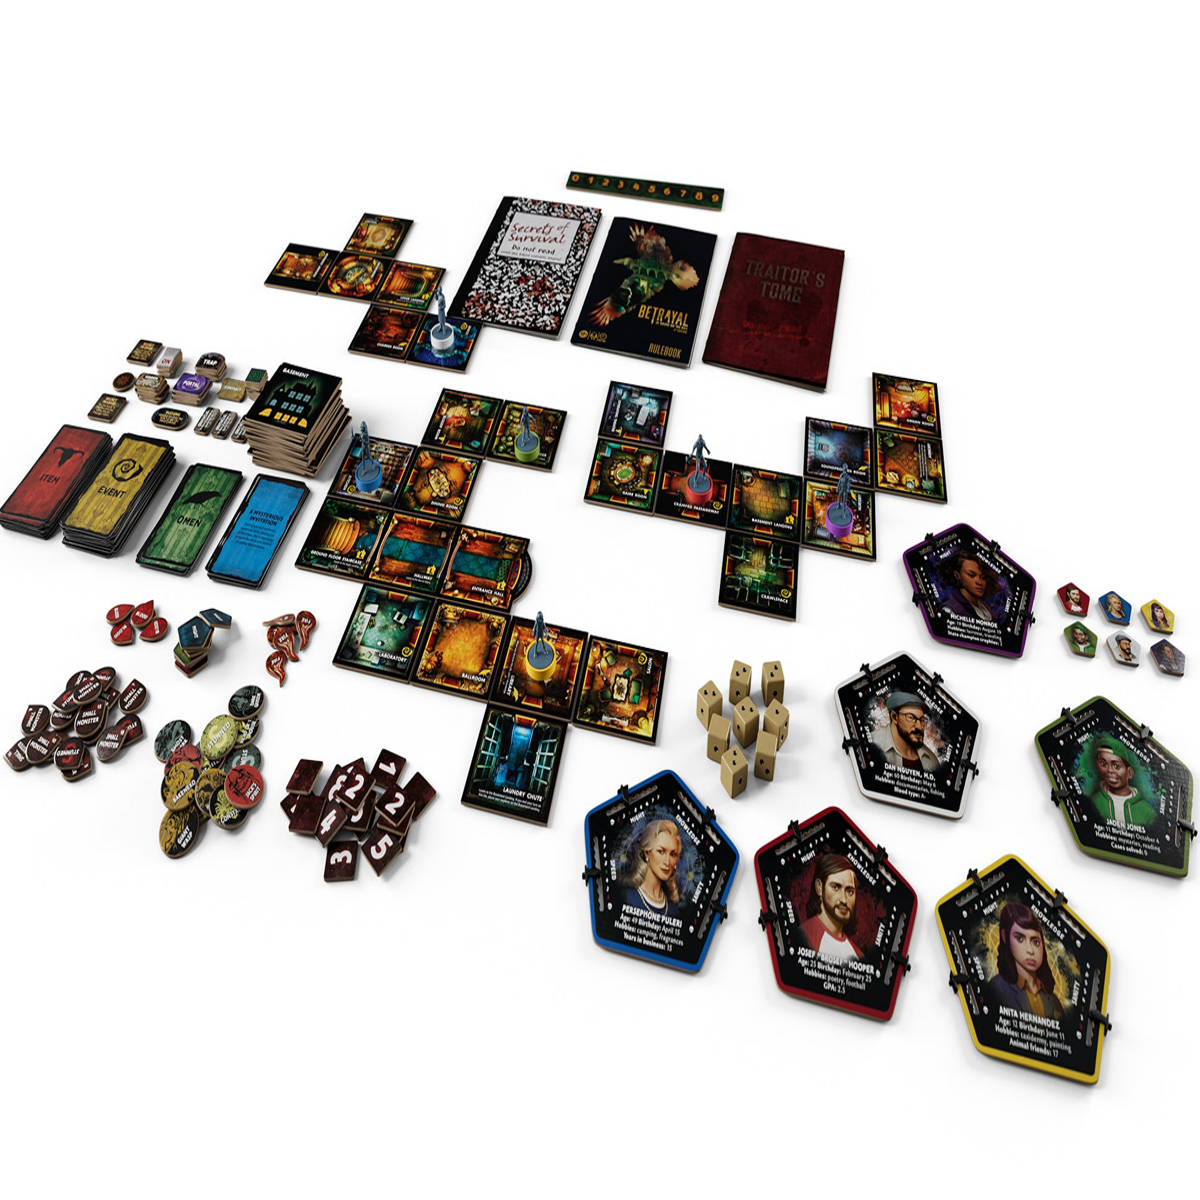 Betrayal at House on the Hill: Third Edition review – Horror board game's  greatest and messiest hits